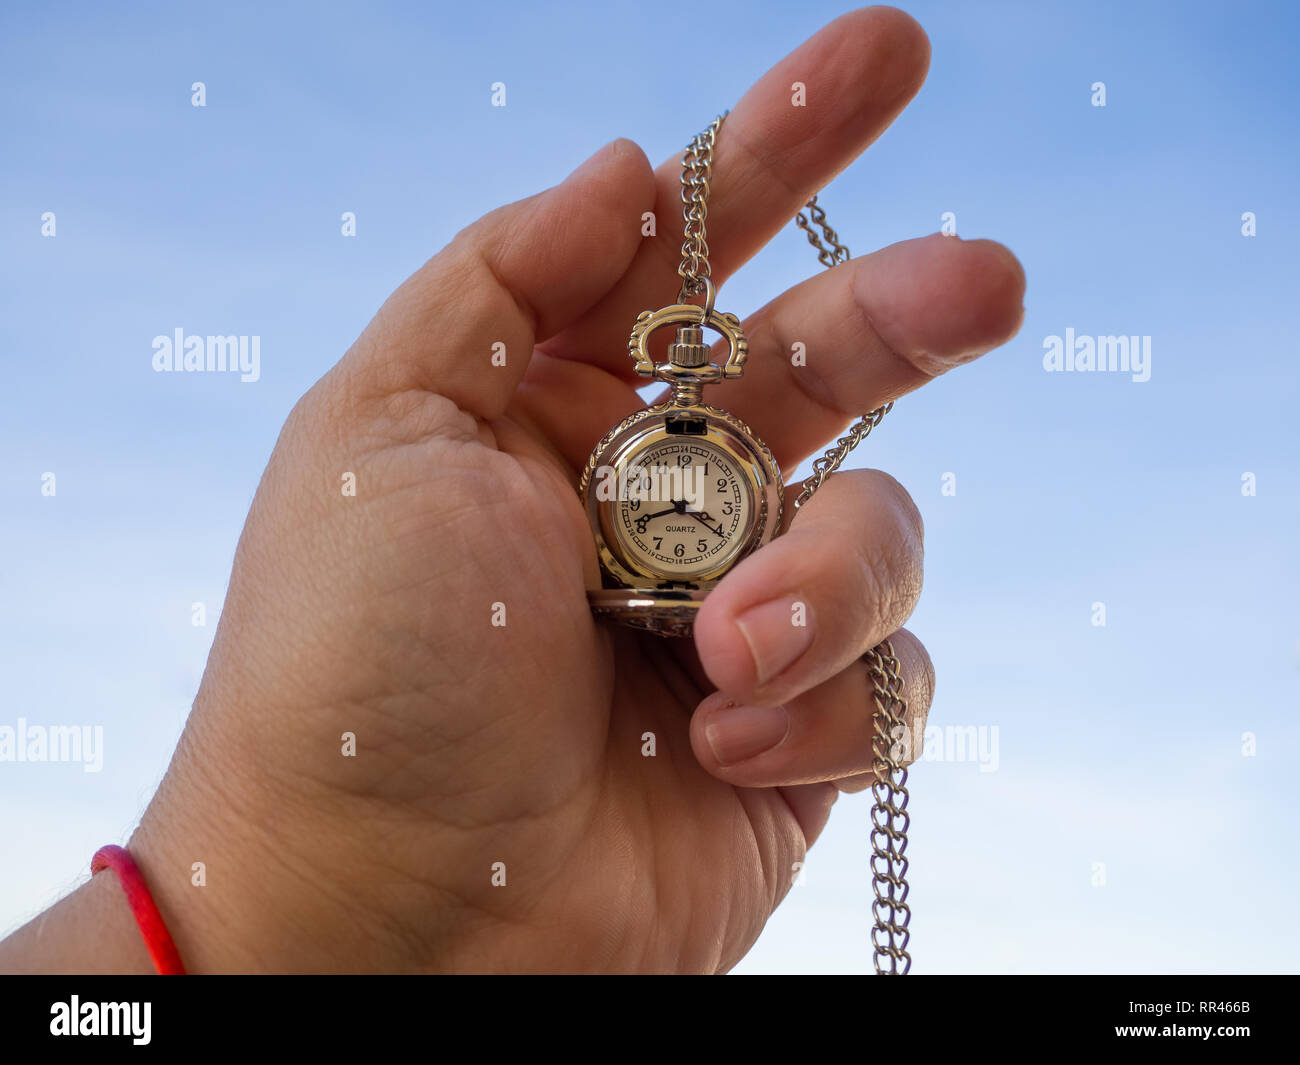 One person with one antique chain watch plated in his hand Stock Photo